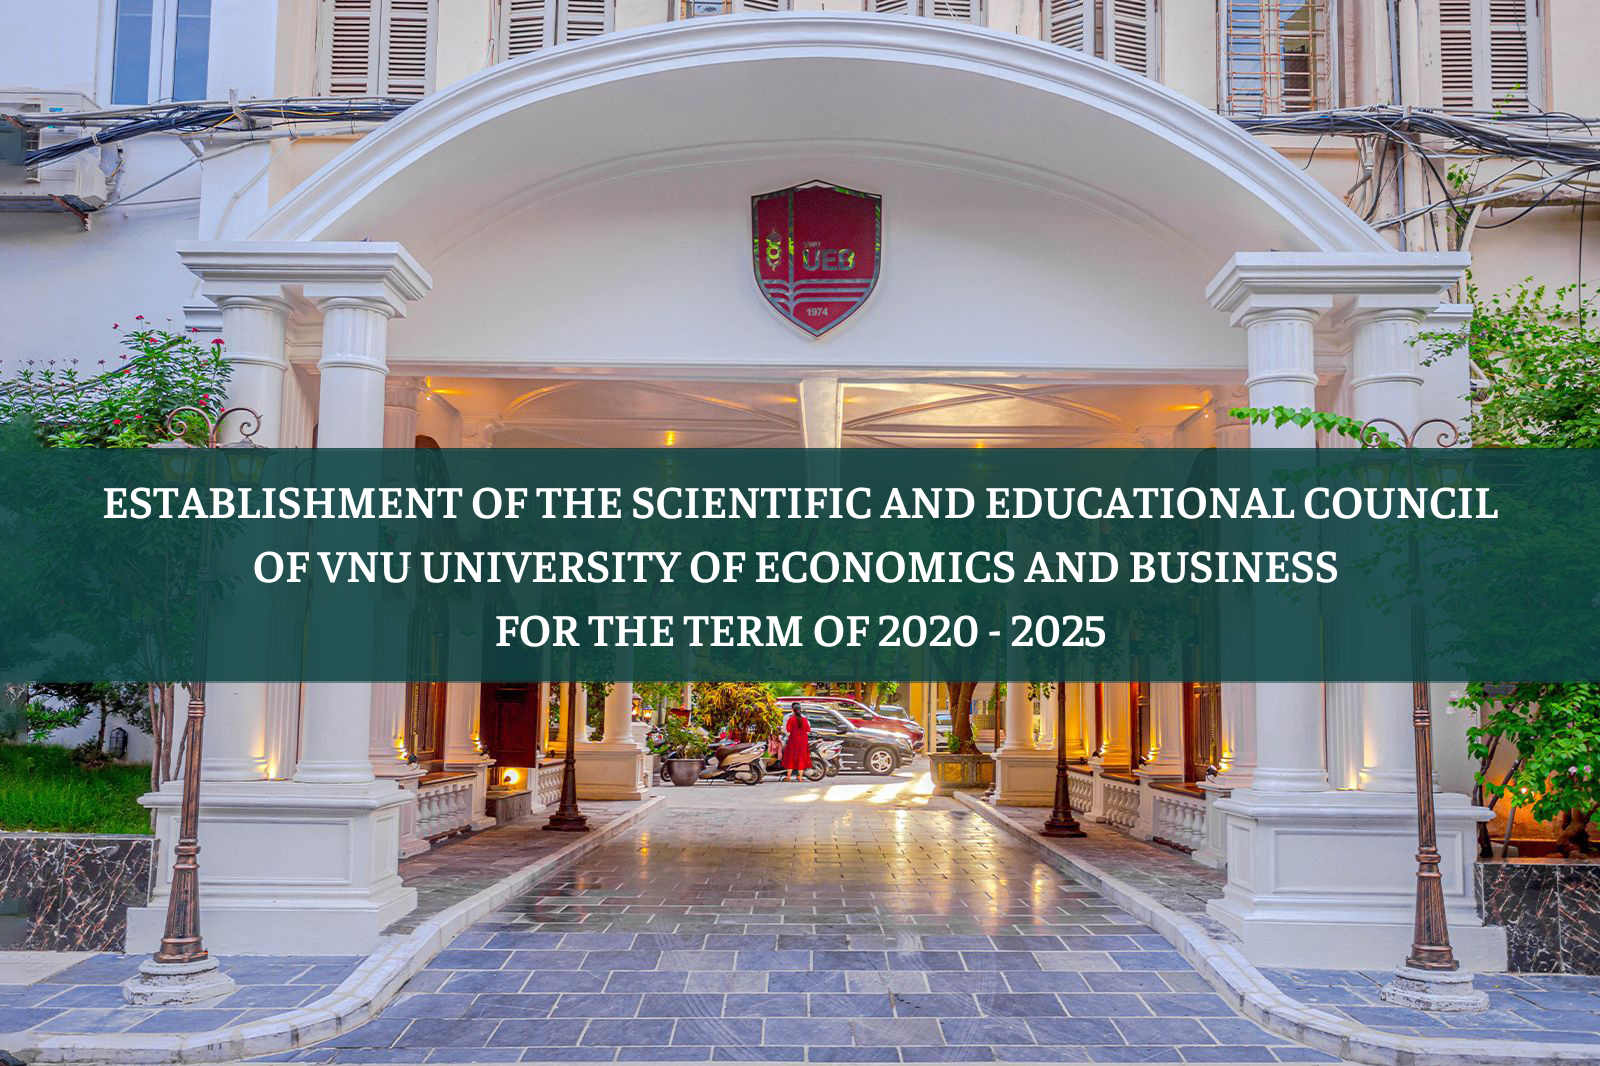 Establishment of the Scientific and Educational Council of the VNU University of Economics and Business for the term of 2020 - 2025